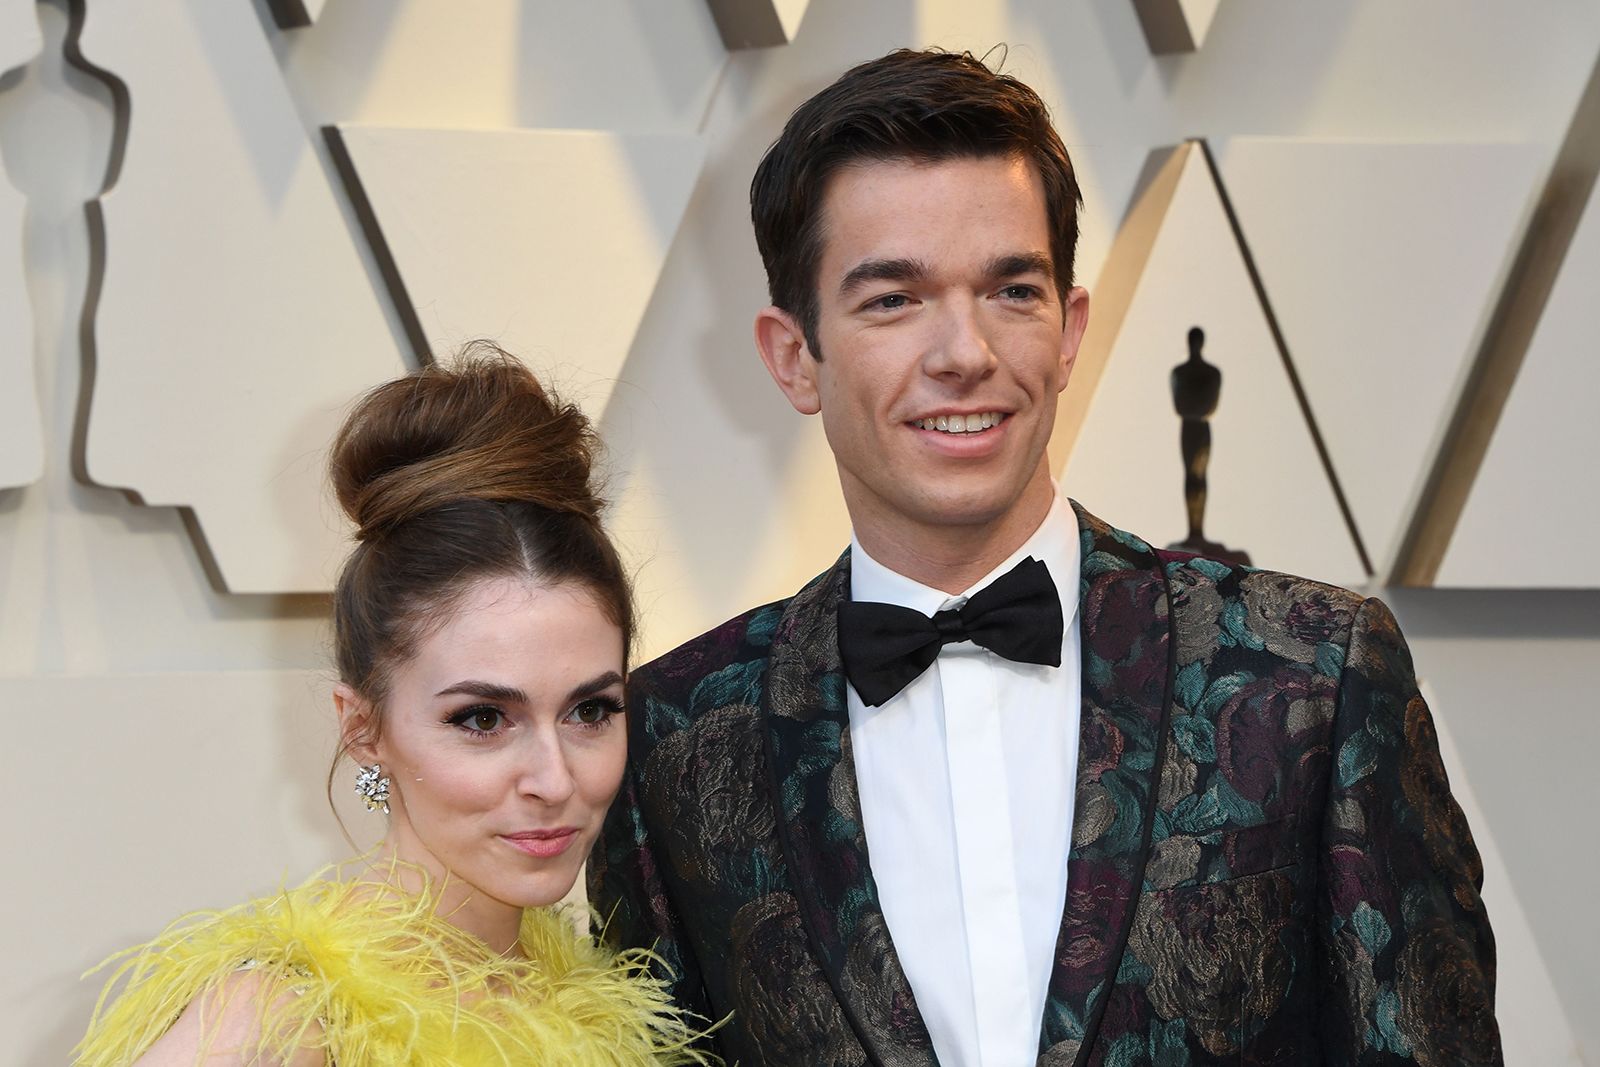 The Divorce Between John Mulaney and Anna Marie Tendler Is Finally Finalized??